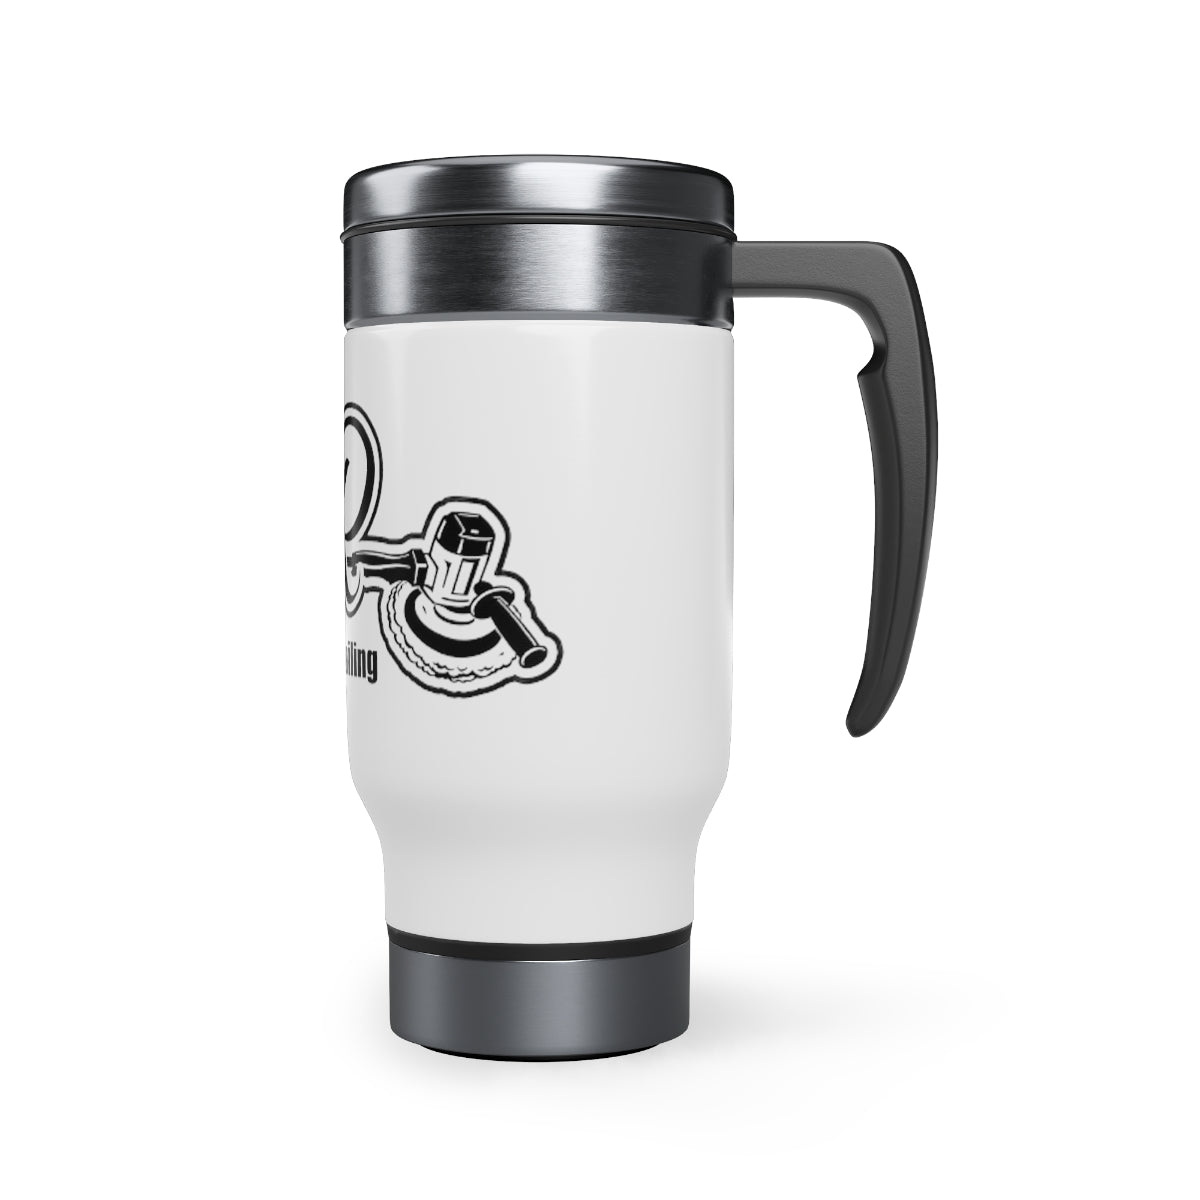 Doble R Stainless Steel Travel Mug with Handle, 14oz